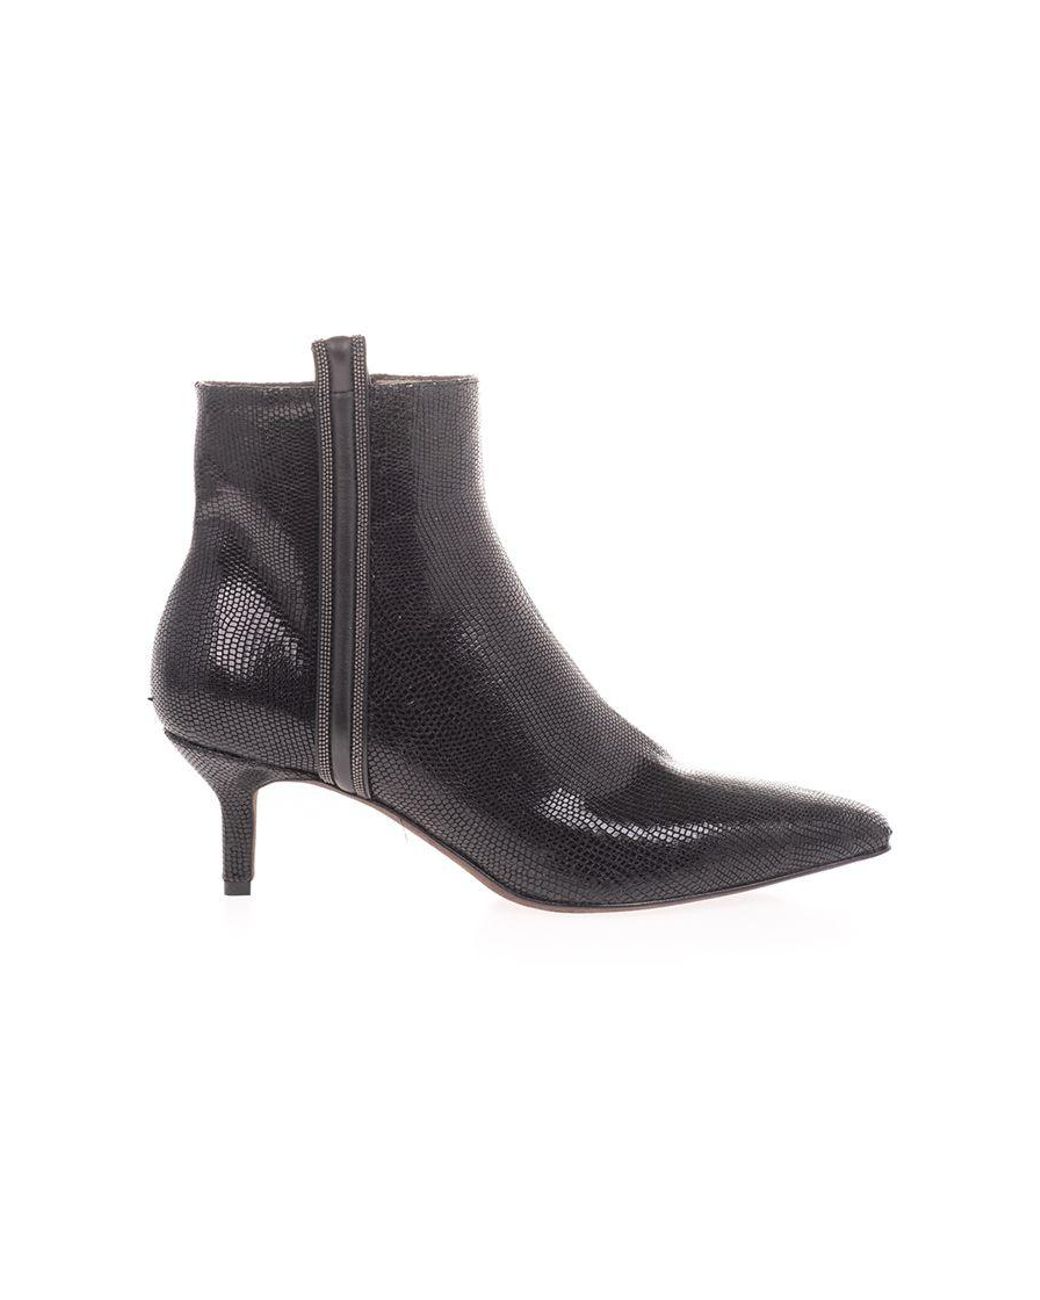 Brunello Cucinelli Leather Ankle Boots in Black - Lyst